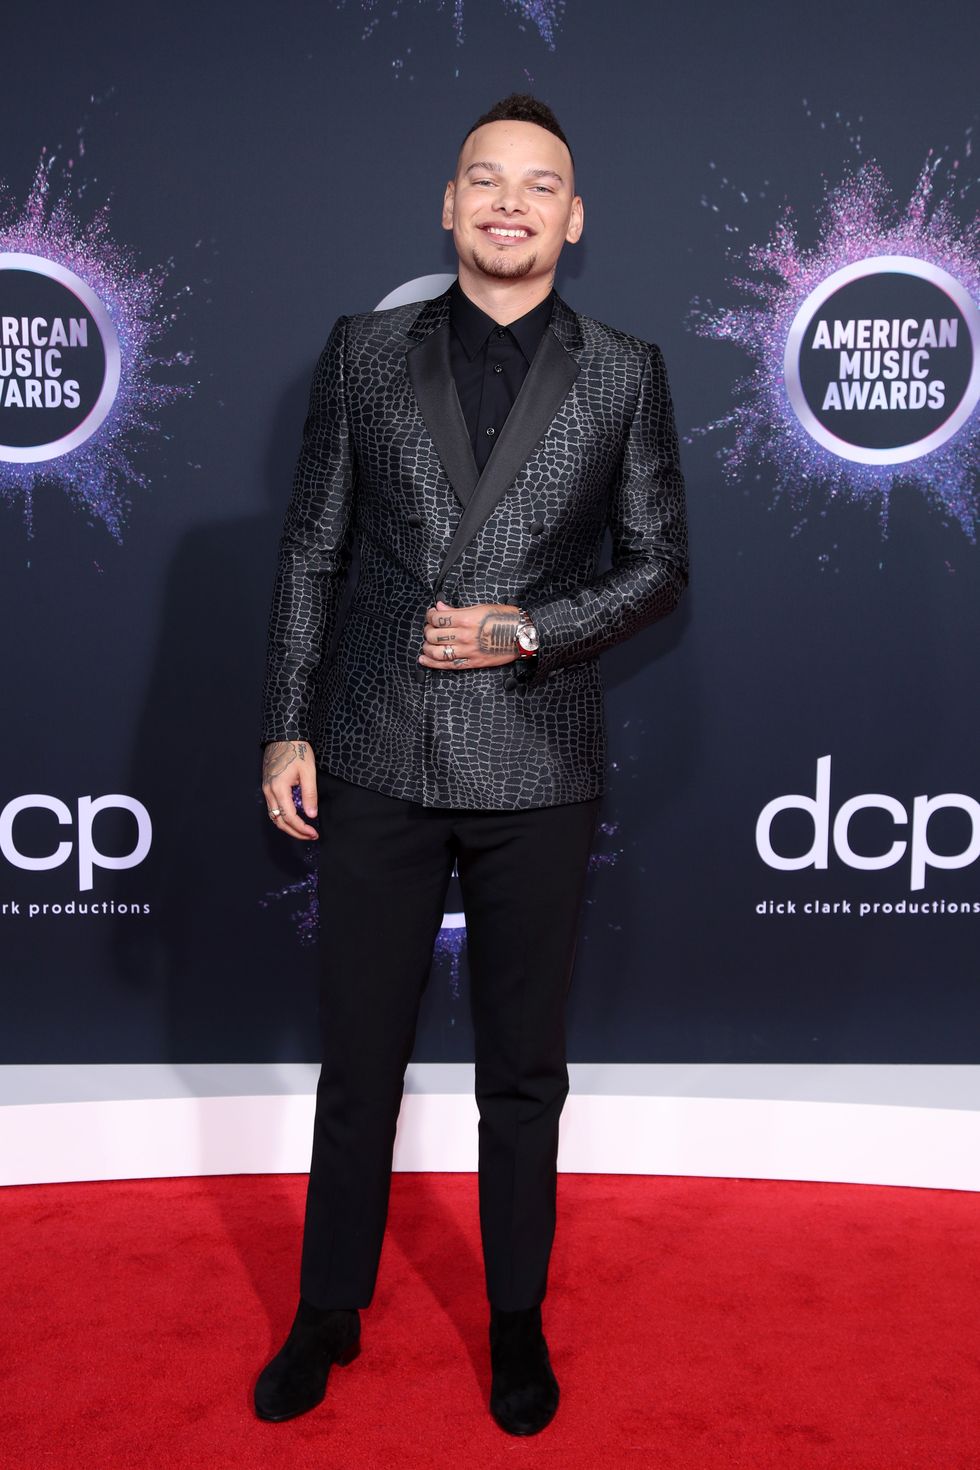 Kane Brown at the 2019 American Music Awards - Arrivals